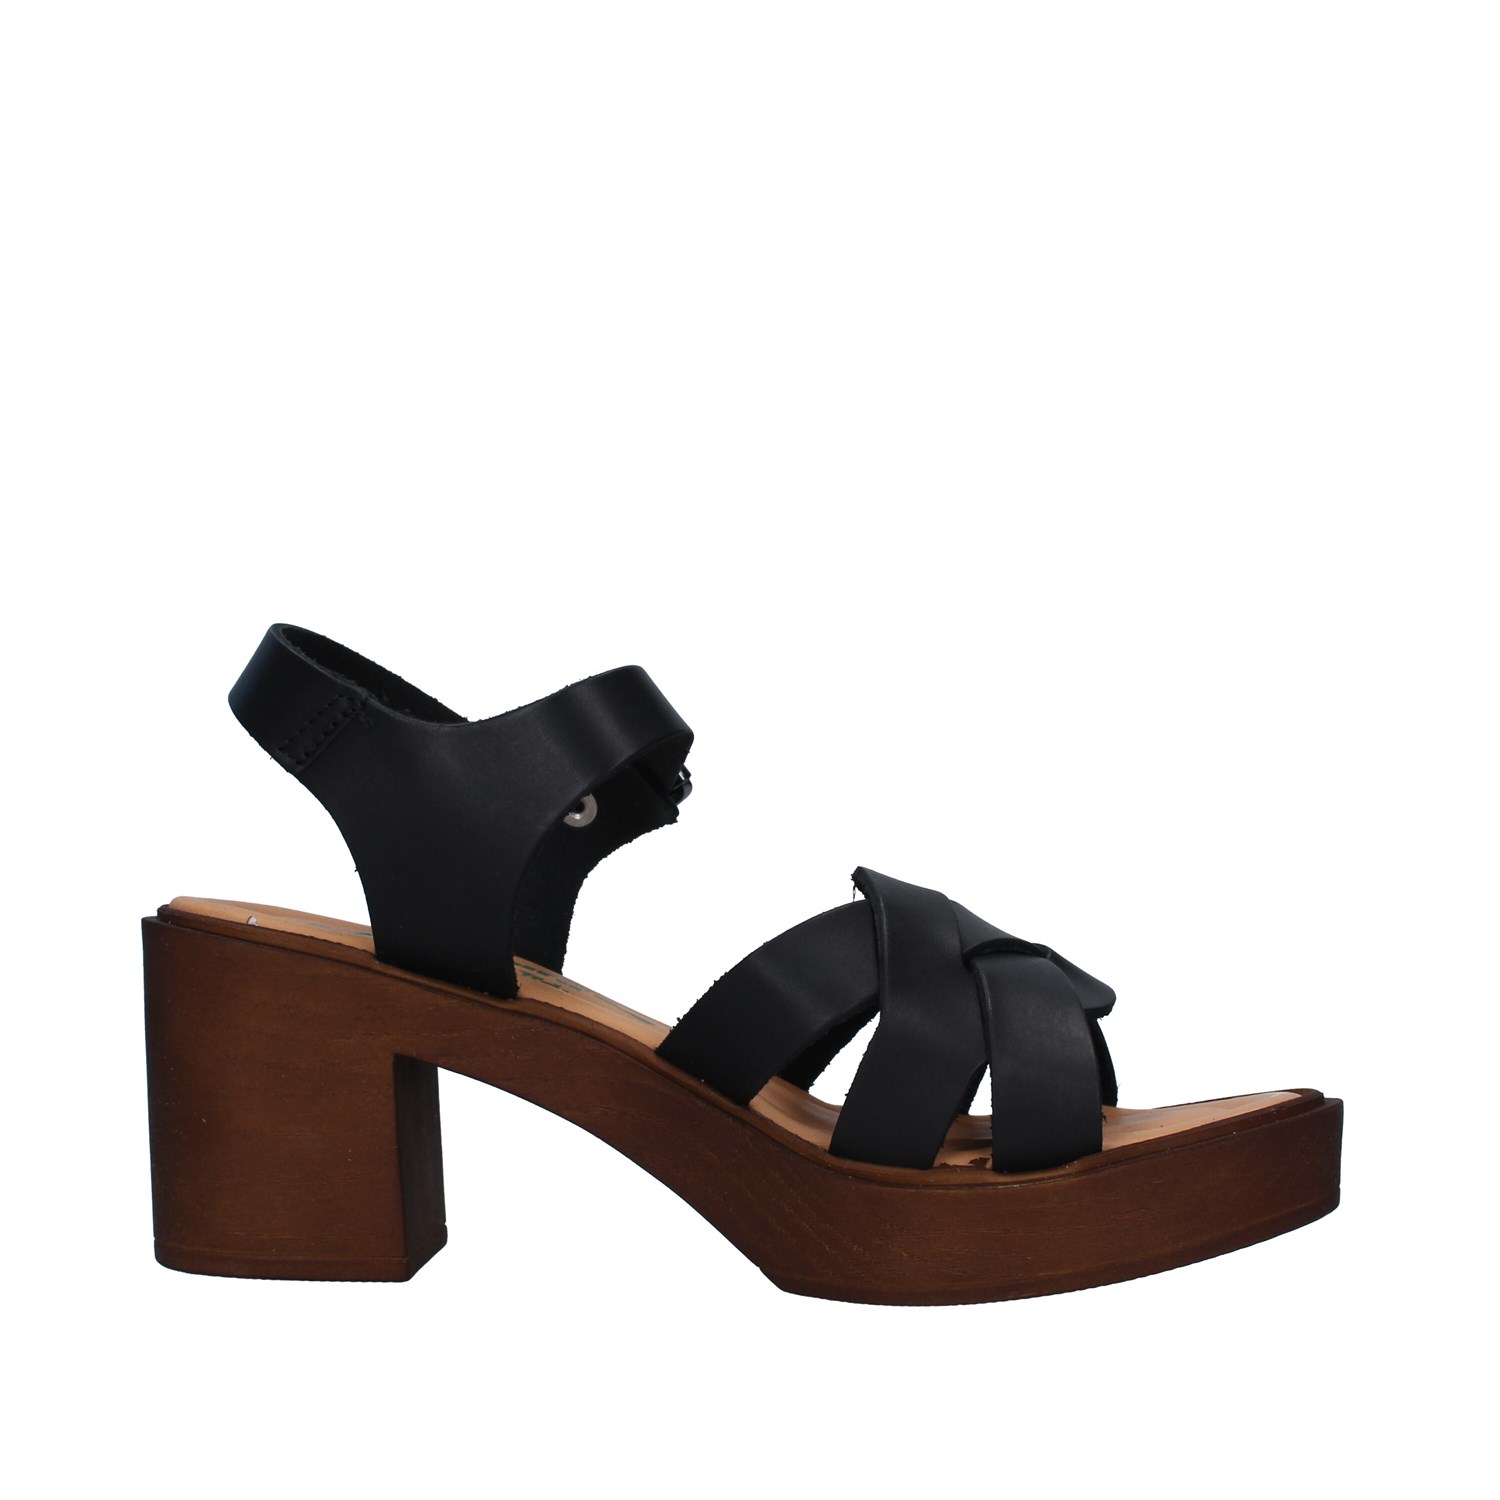 Bionatura Shoes Woman With heel BLACK 99A2268